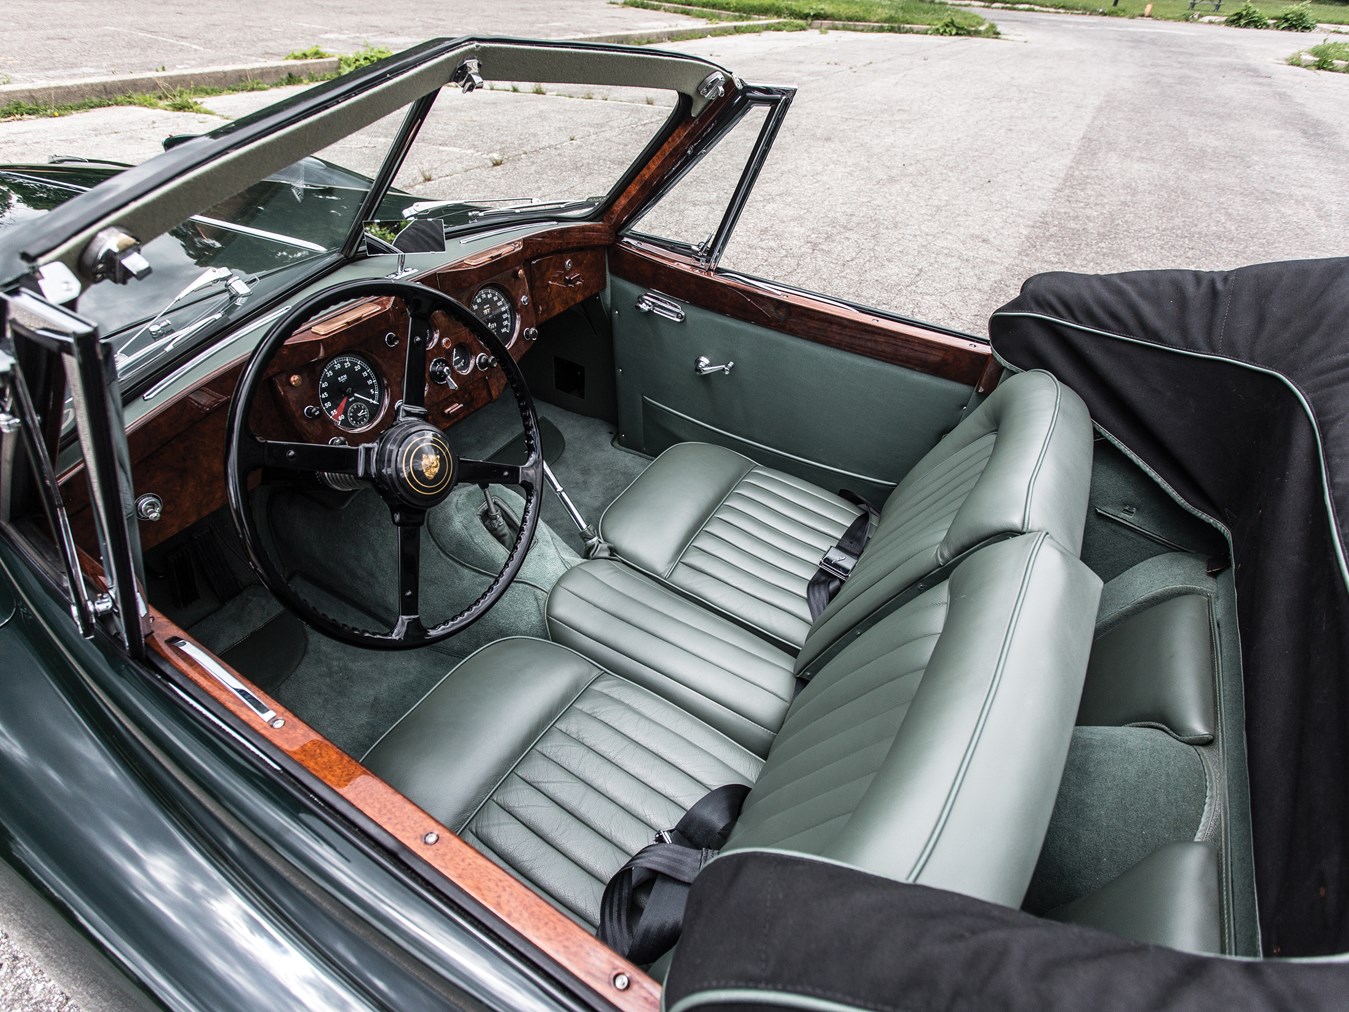 The Jaguar XK140 offered a significant upgrade in interior luxury by comparison with the XK120 it superceded.